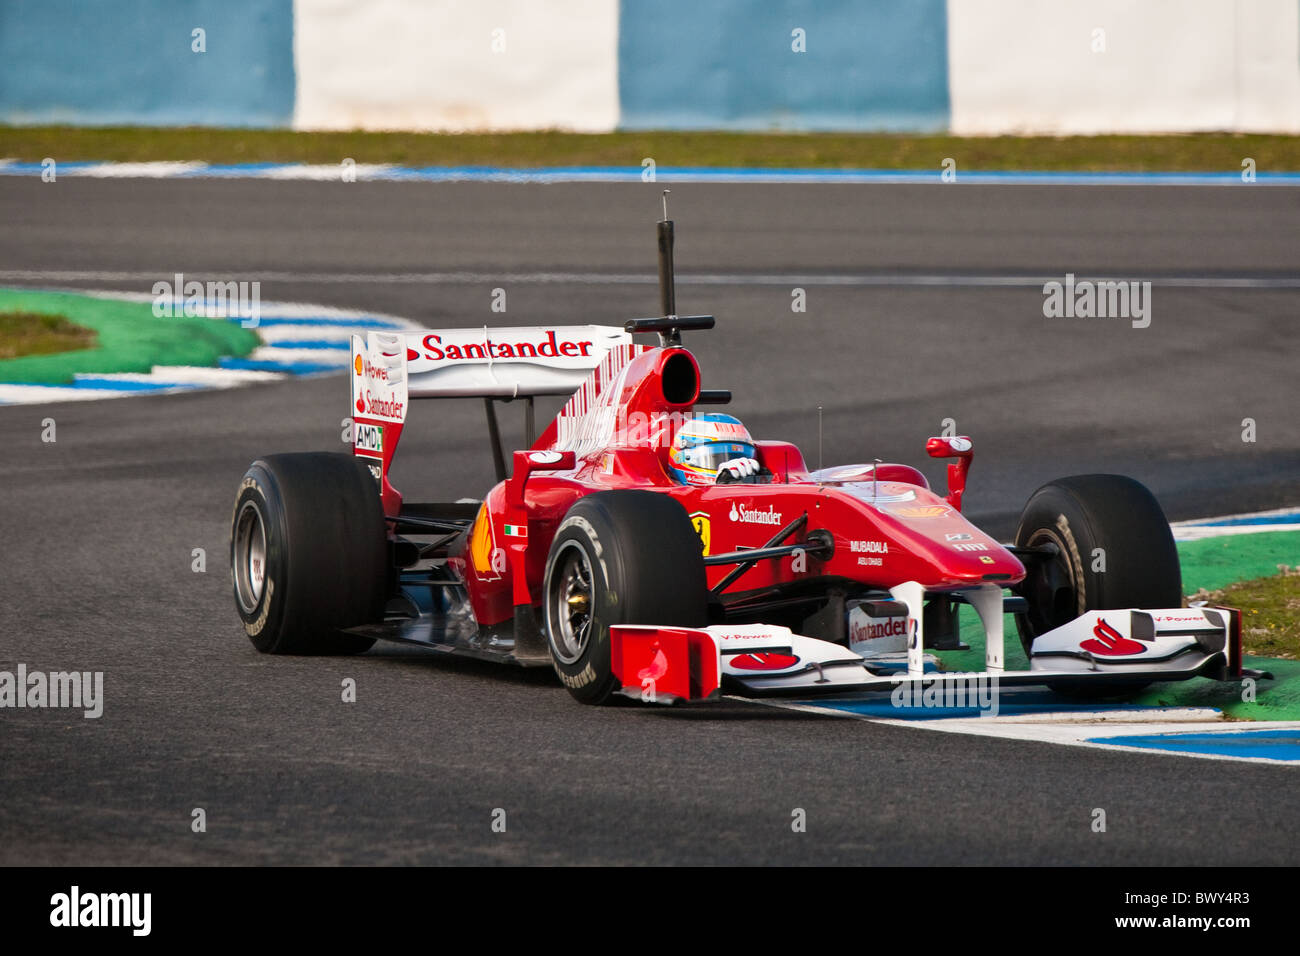 Fernando Alonso at the 2010 Jerez practice in his FERRARI, Formula 1 car at the  practice, leaving the chicane. Stock Photo